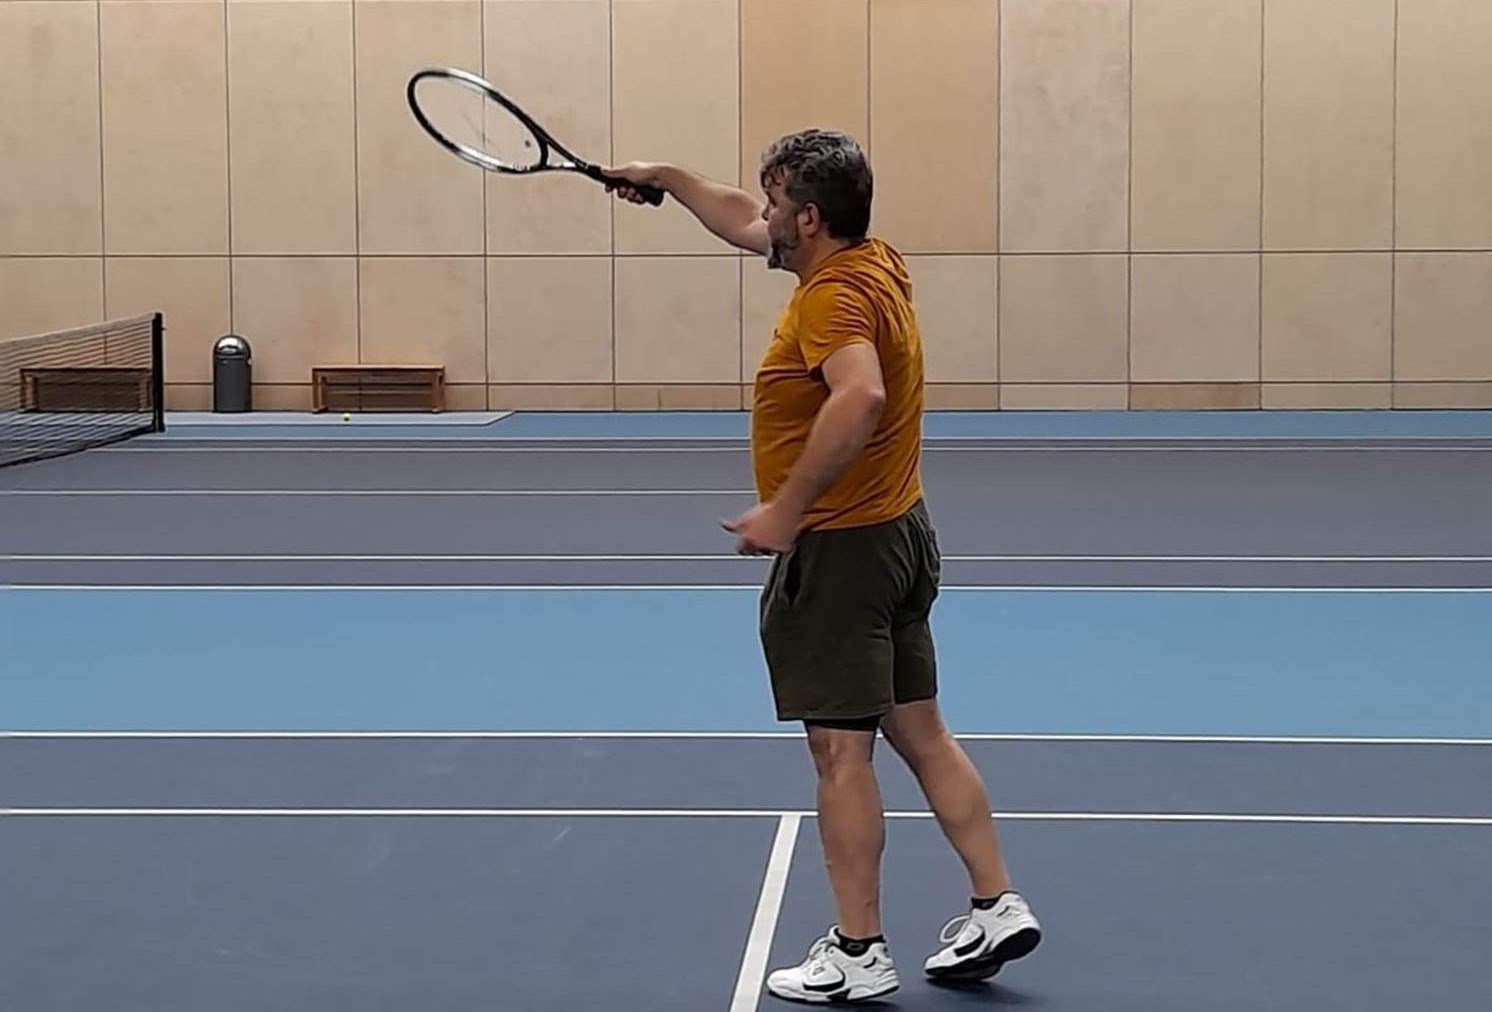 Player hitting a volley at the Lee Valley tennis centre